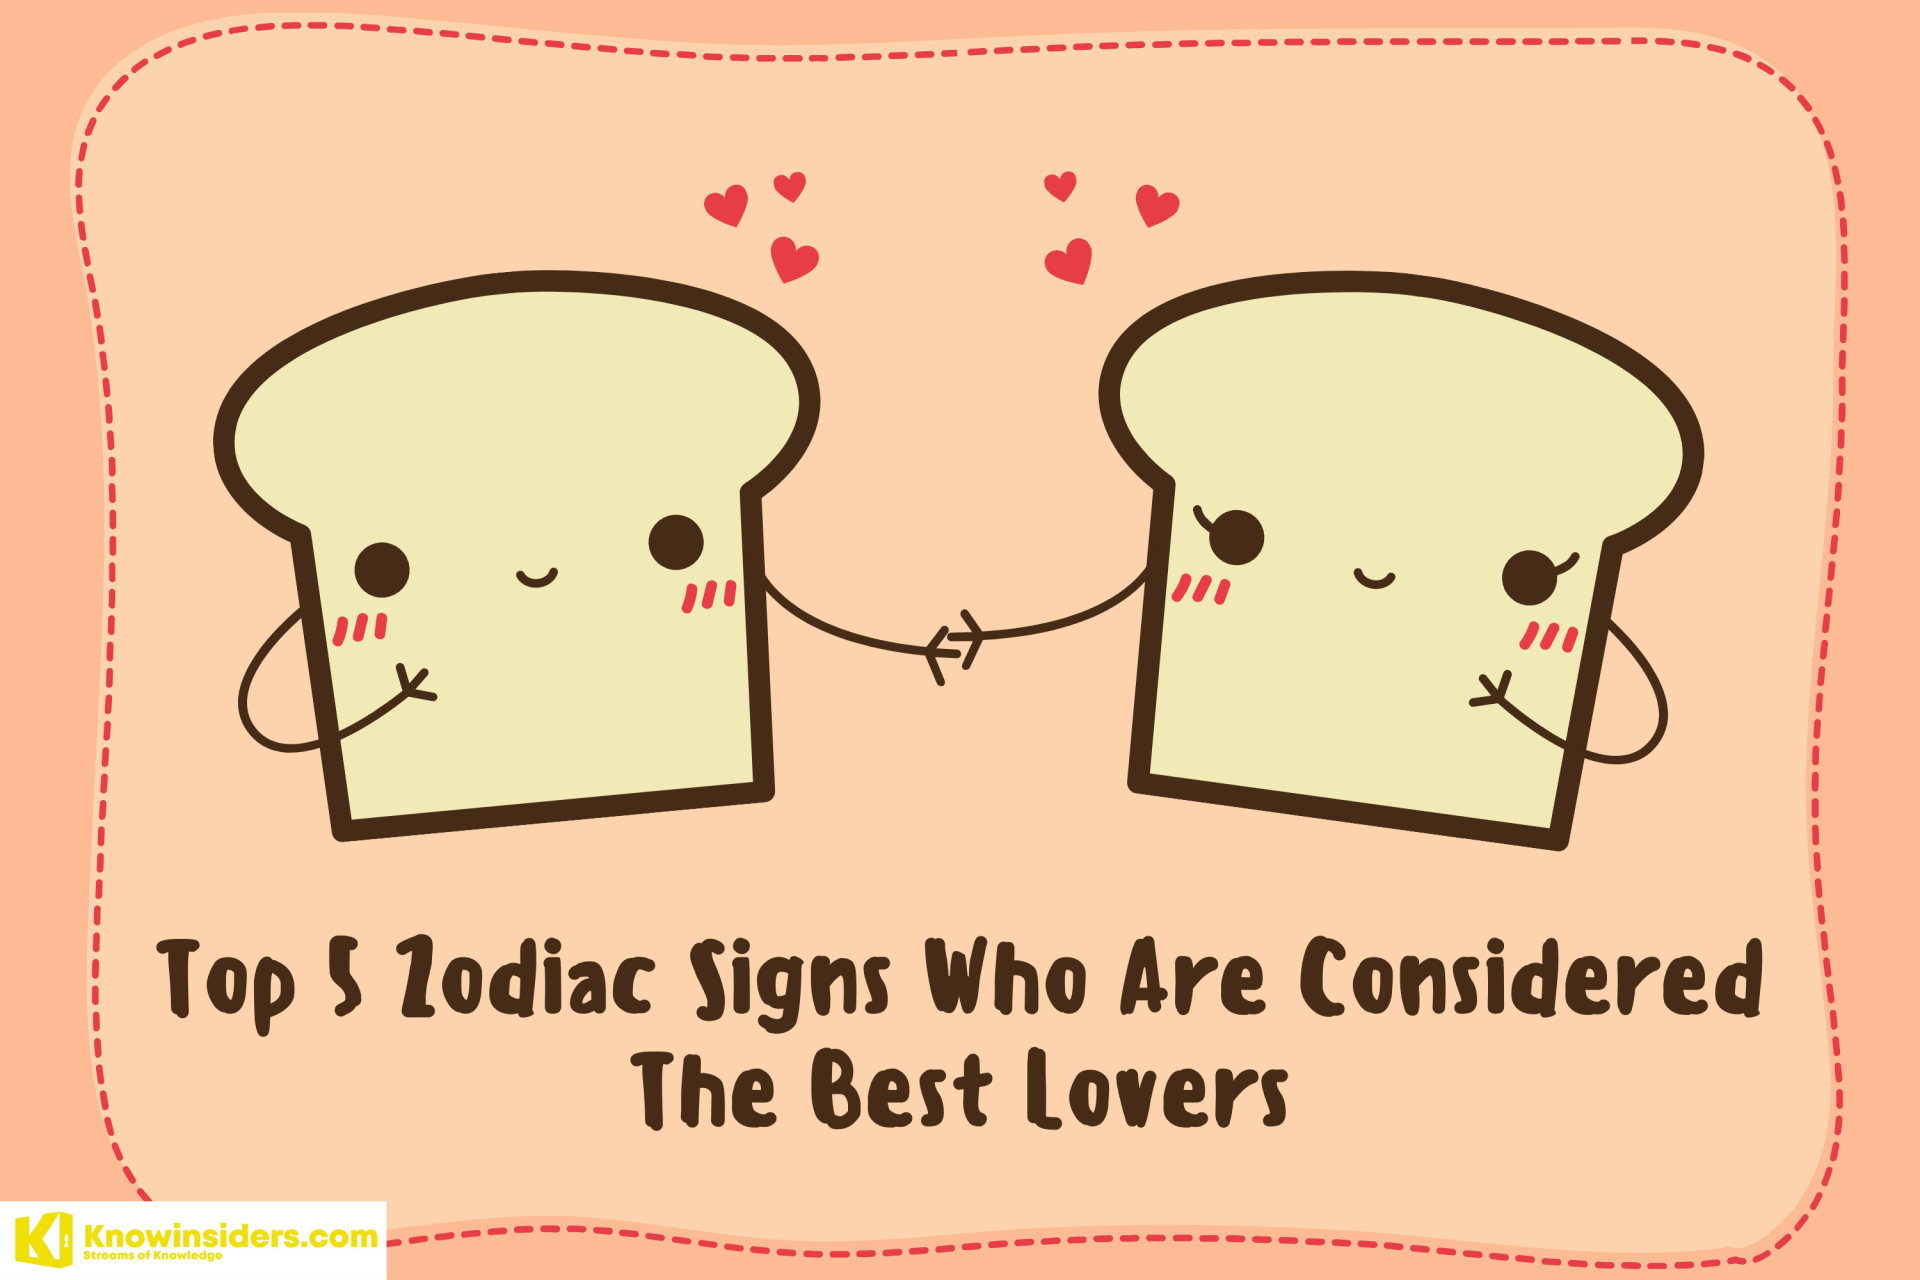 Top 5 Zodiac Signs Who Are Considered The Best Lovers As Your Dream